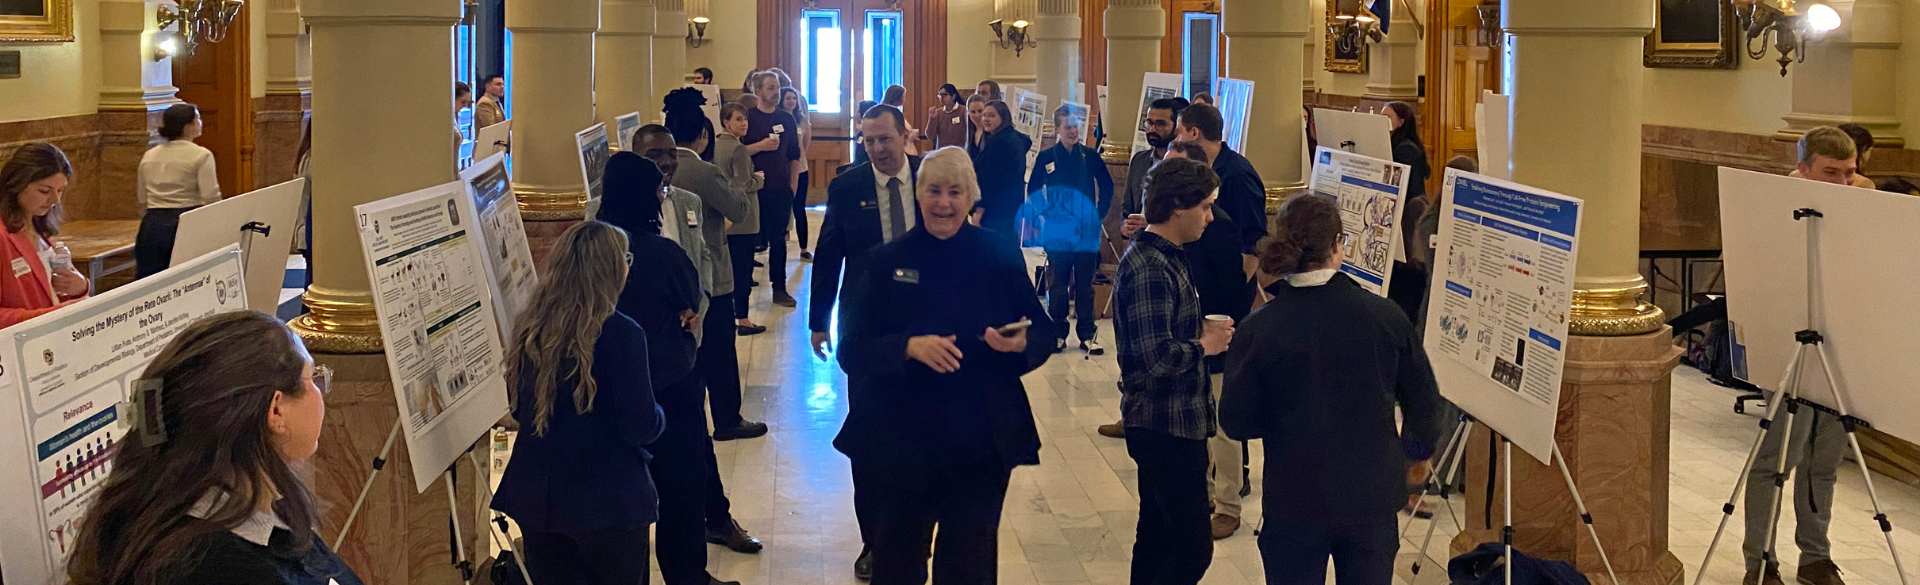 STEM Poster Day at the Colorado Capitol